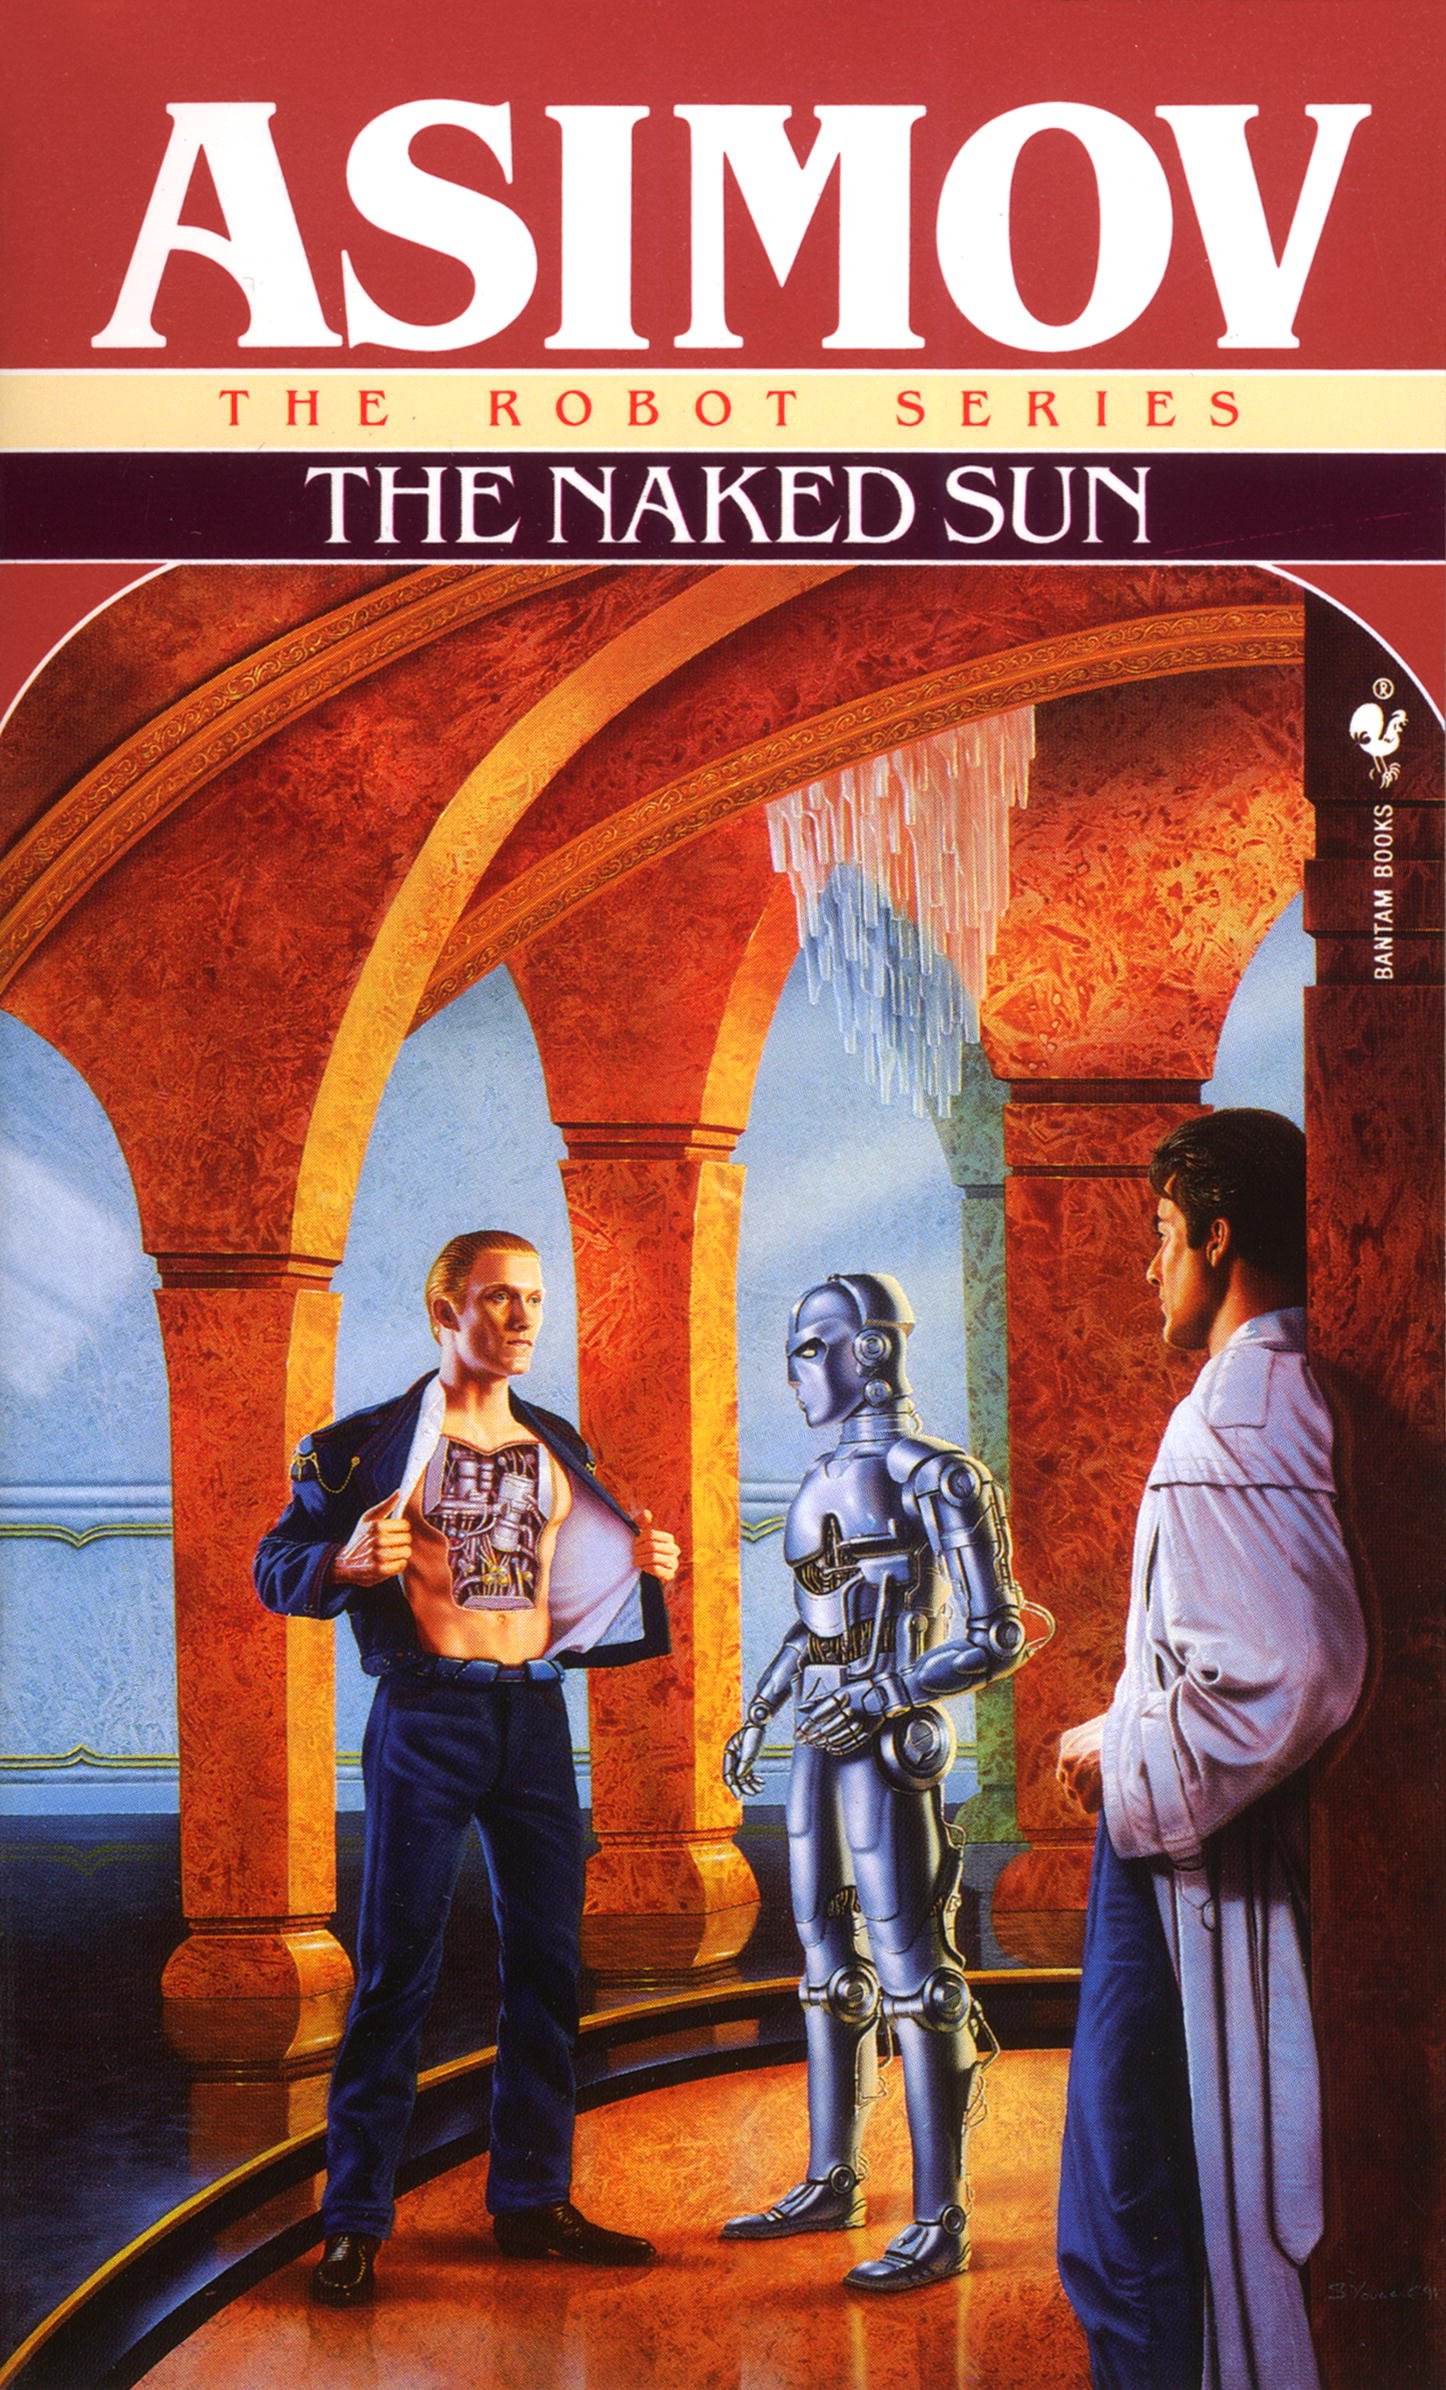 The Naked Sun (The Robot Series Book 2)